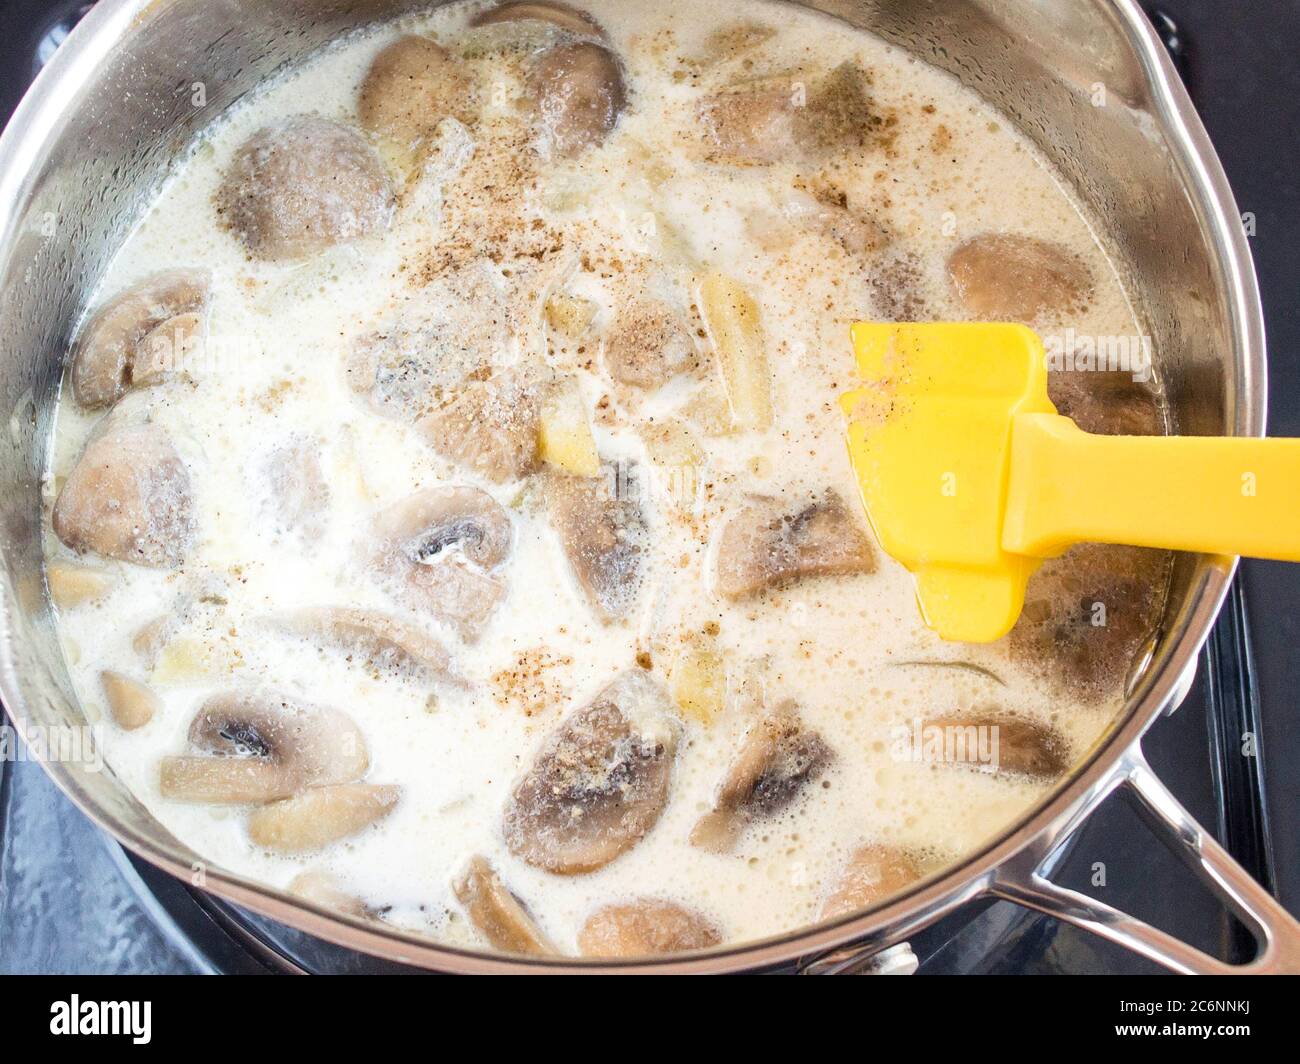 Grind the puree soup ingredients. Mushrooms and potatoes. Cooking cream soup. Stock Photo